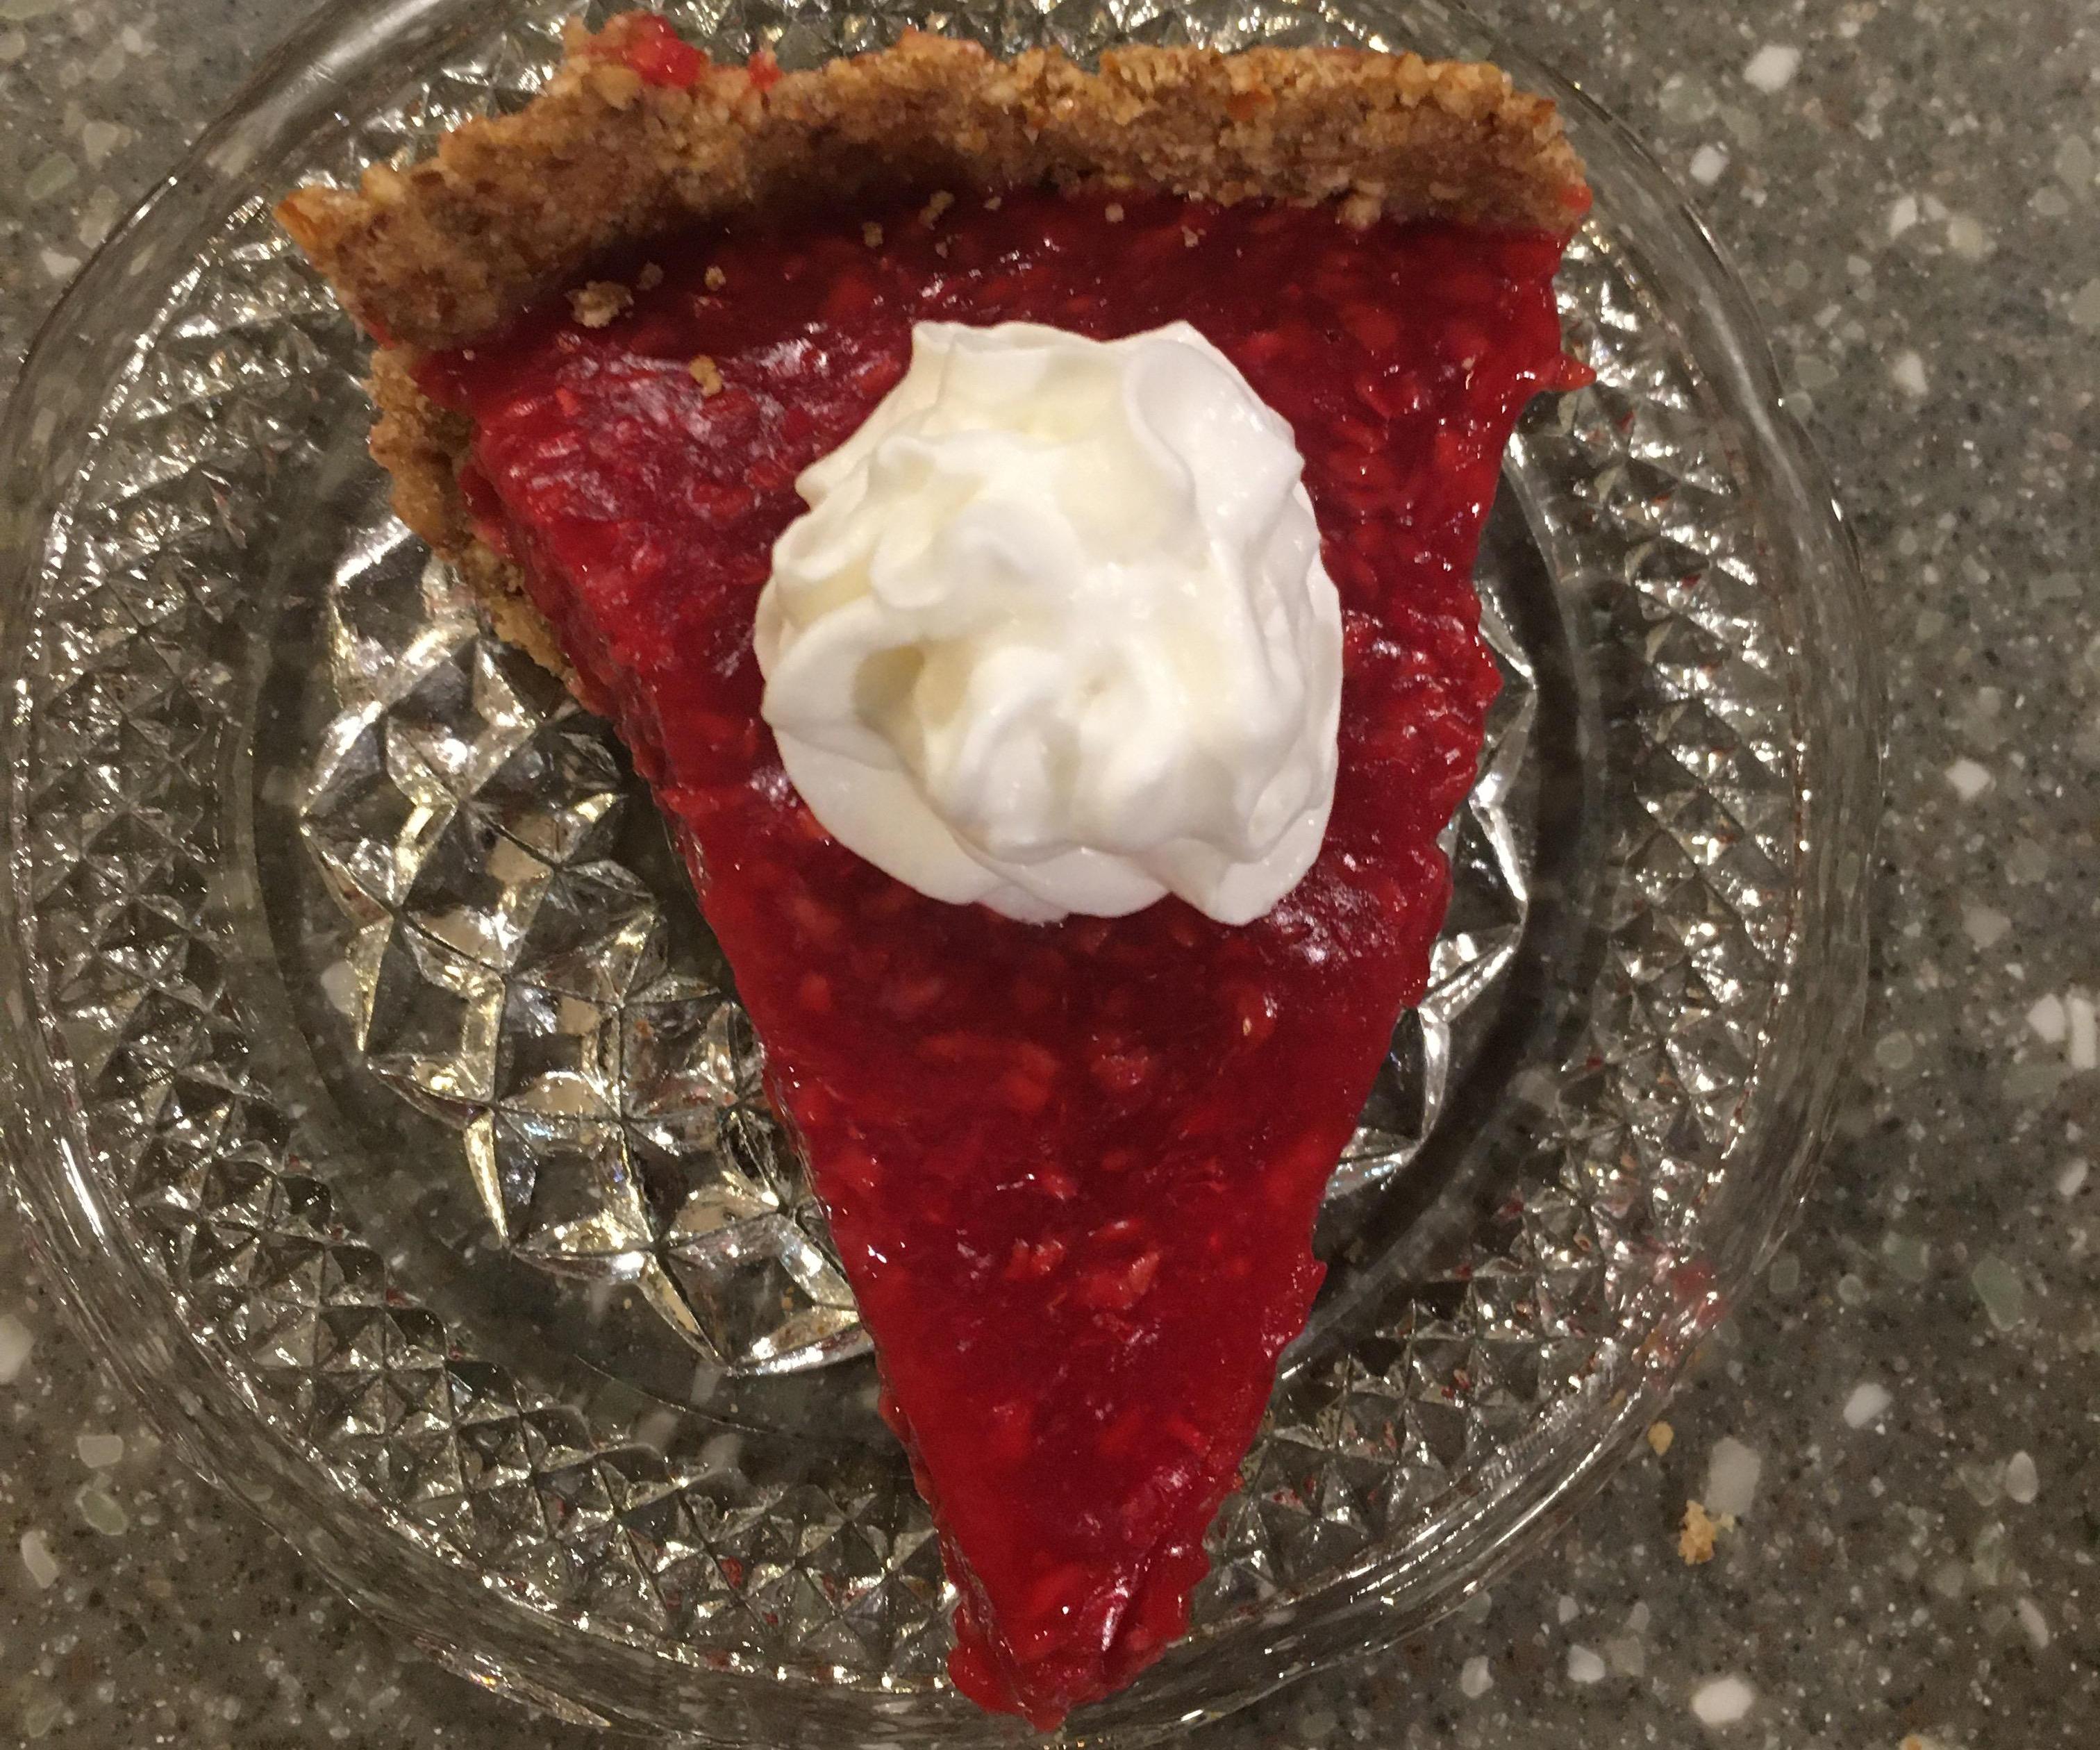 Delicious Literal Raspberry Pi(e) With Cryptic Mathematical Recipe